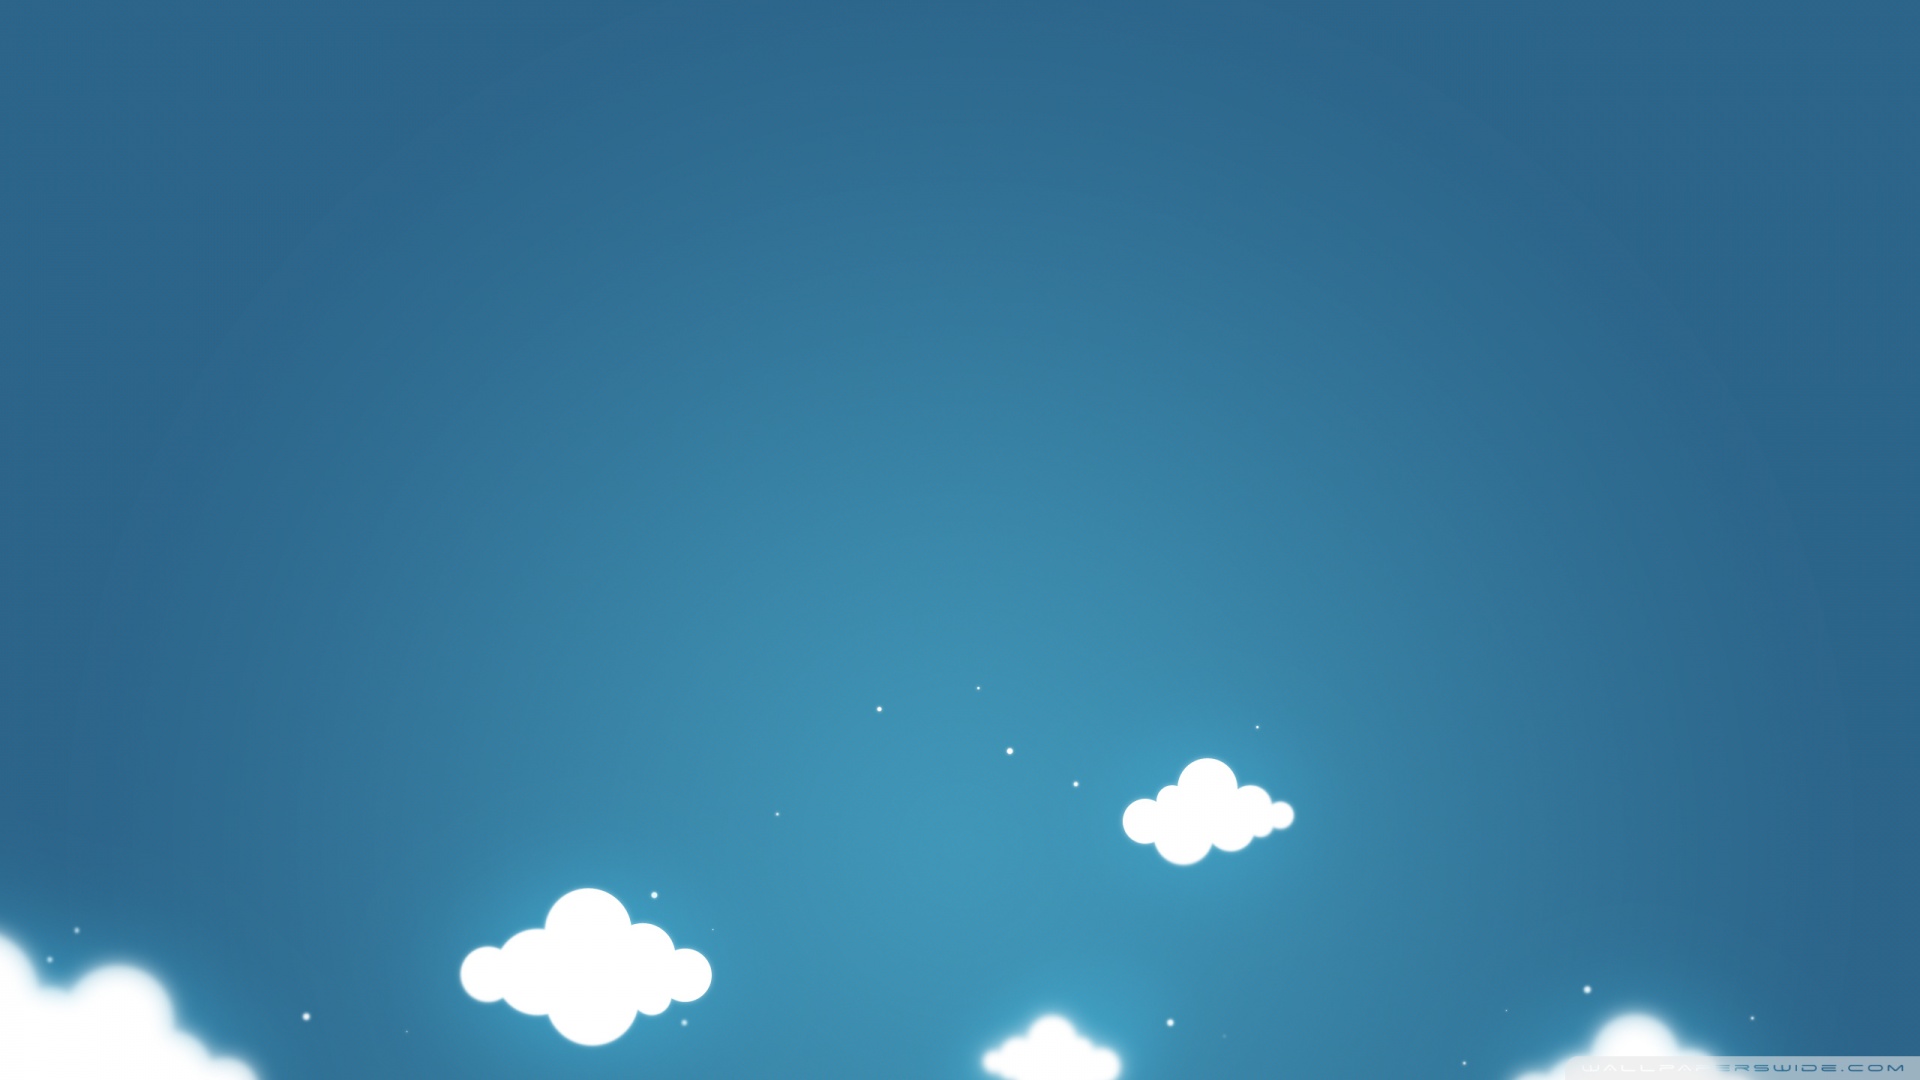 Clouds on blue sky wallpaper   804022